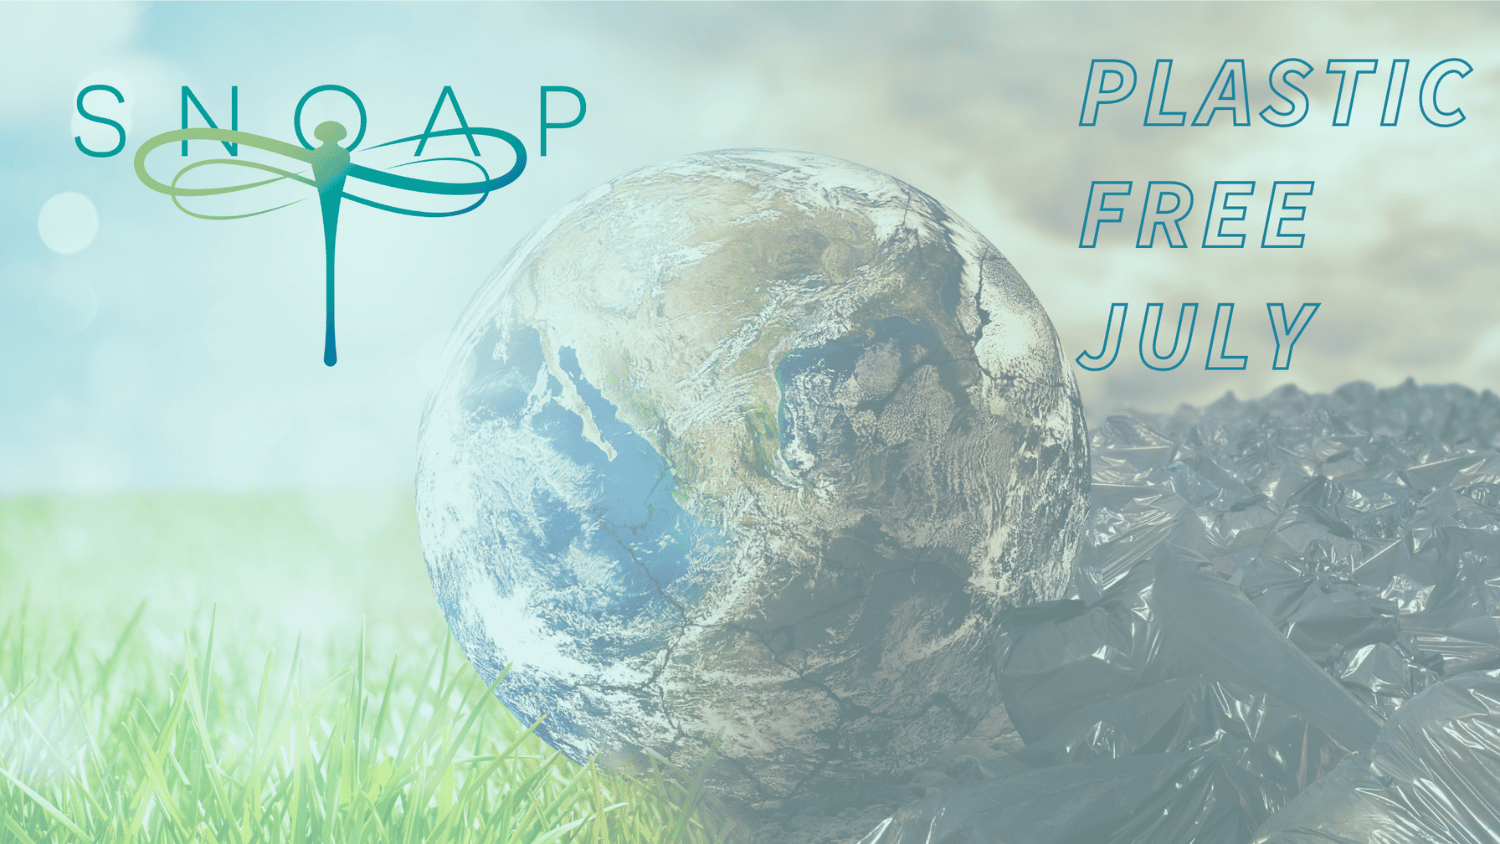 Plastic Free July: Join SNOAP in reducing plastic pollution